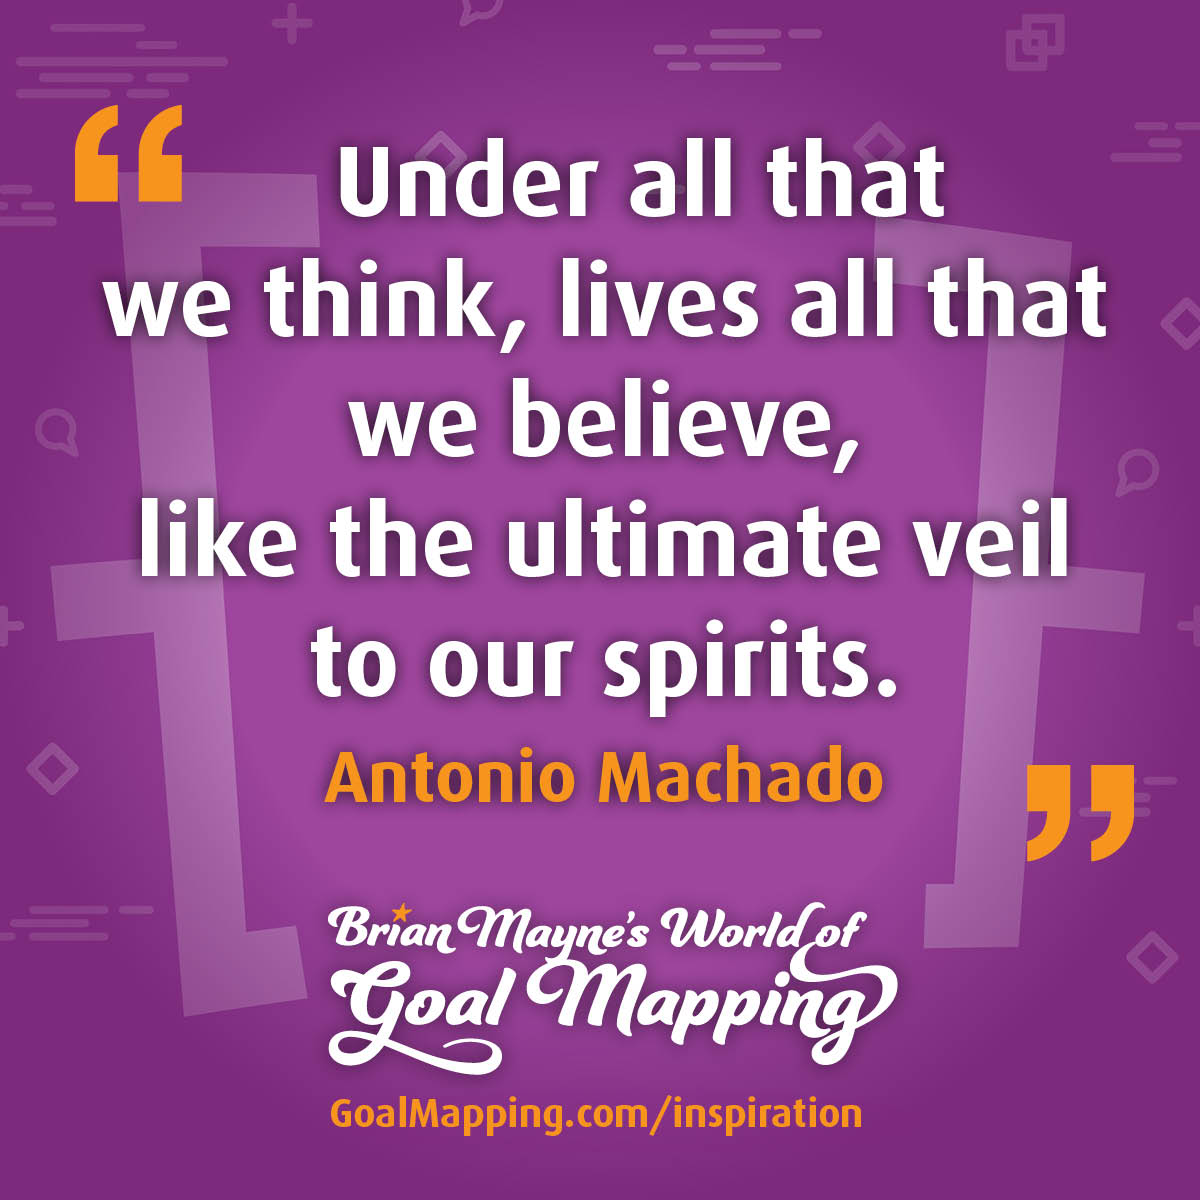 "Under all that we think, lives all that we believe, like the ultimate veil to our spirits." Antonio Machado